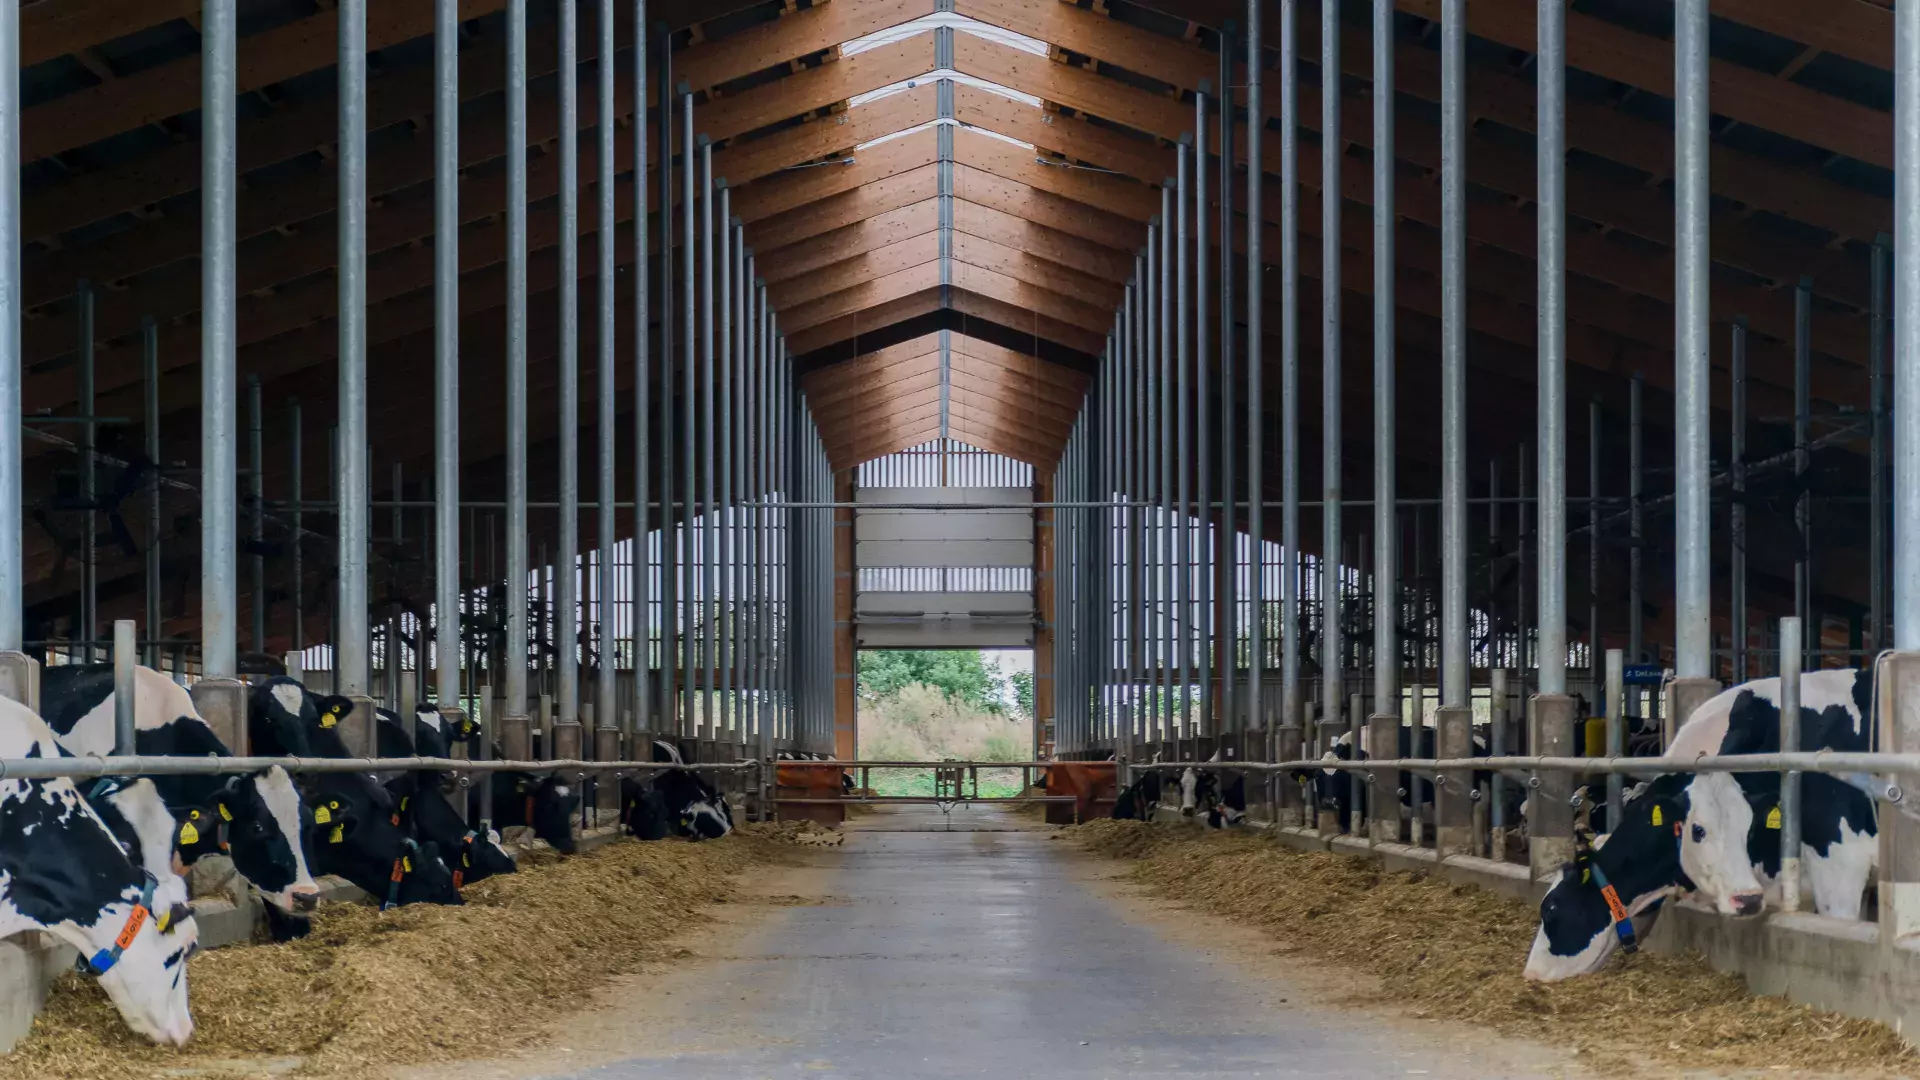 landscape view of cows eating in barns